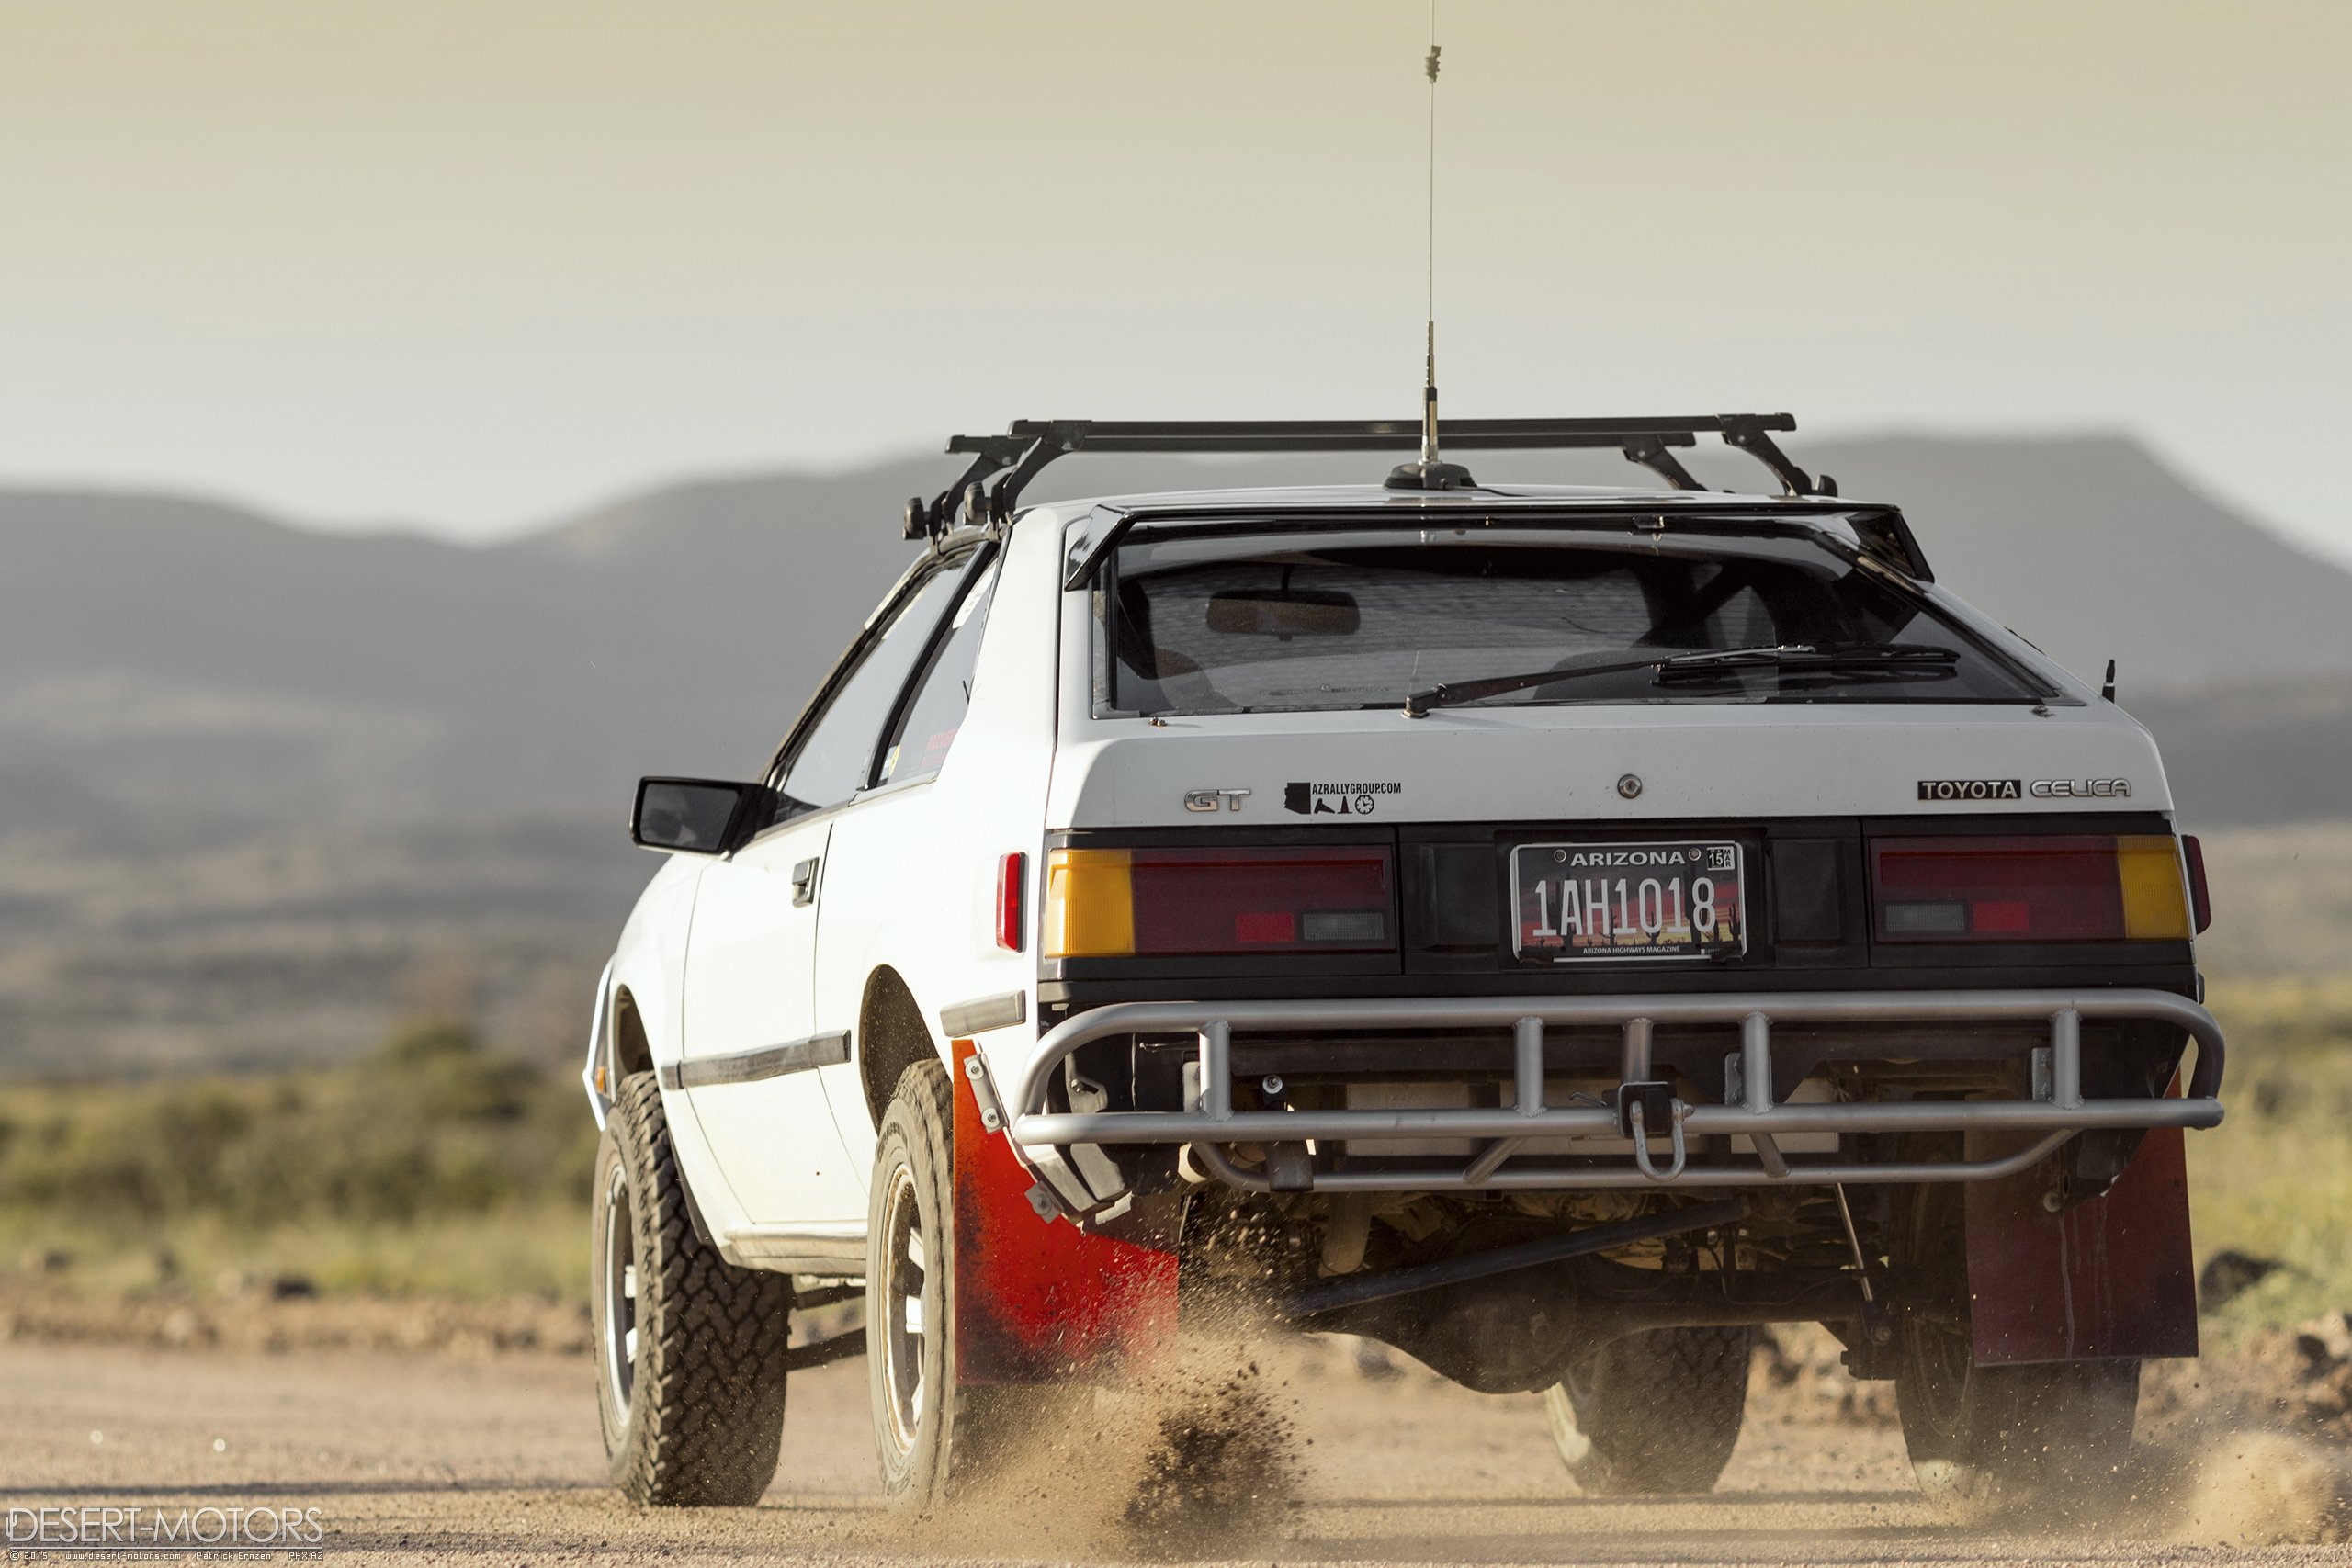 1984, Toyota, Celica, G t, Rally, Race, Racing, Offroad Wallpaper